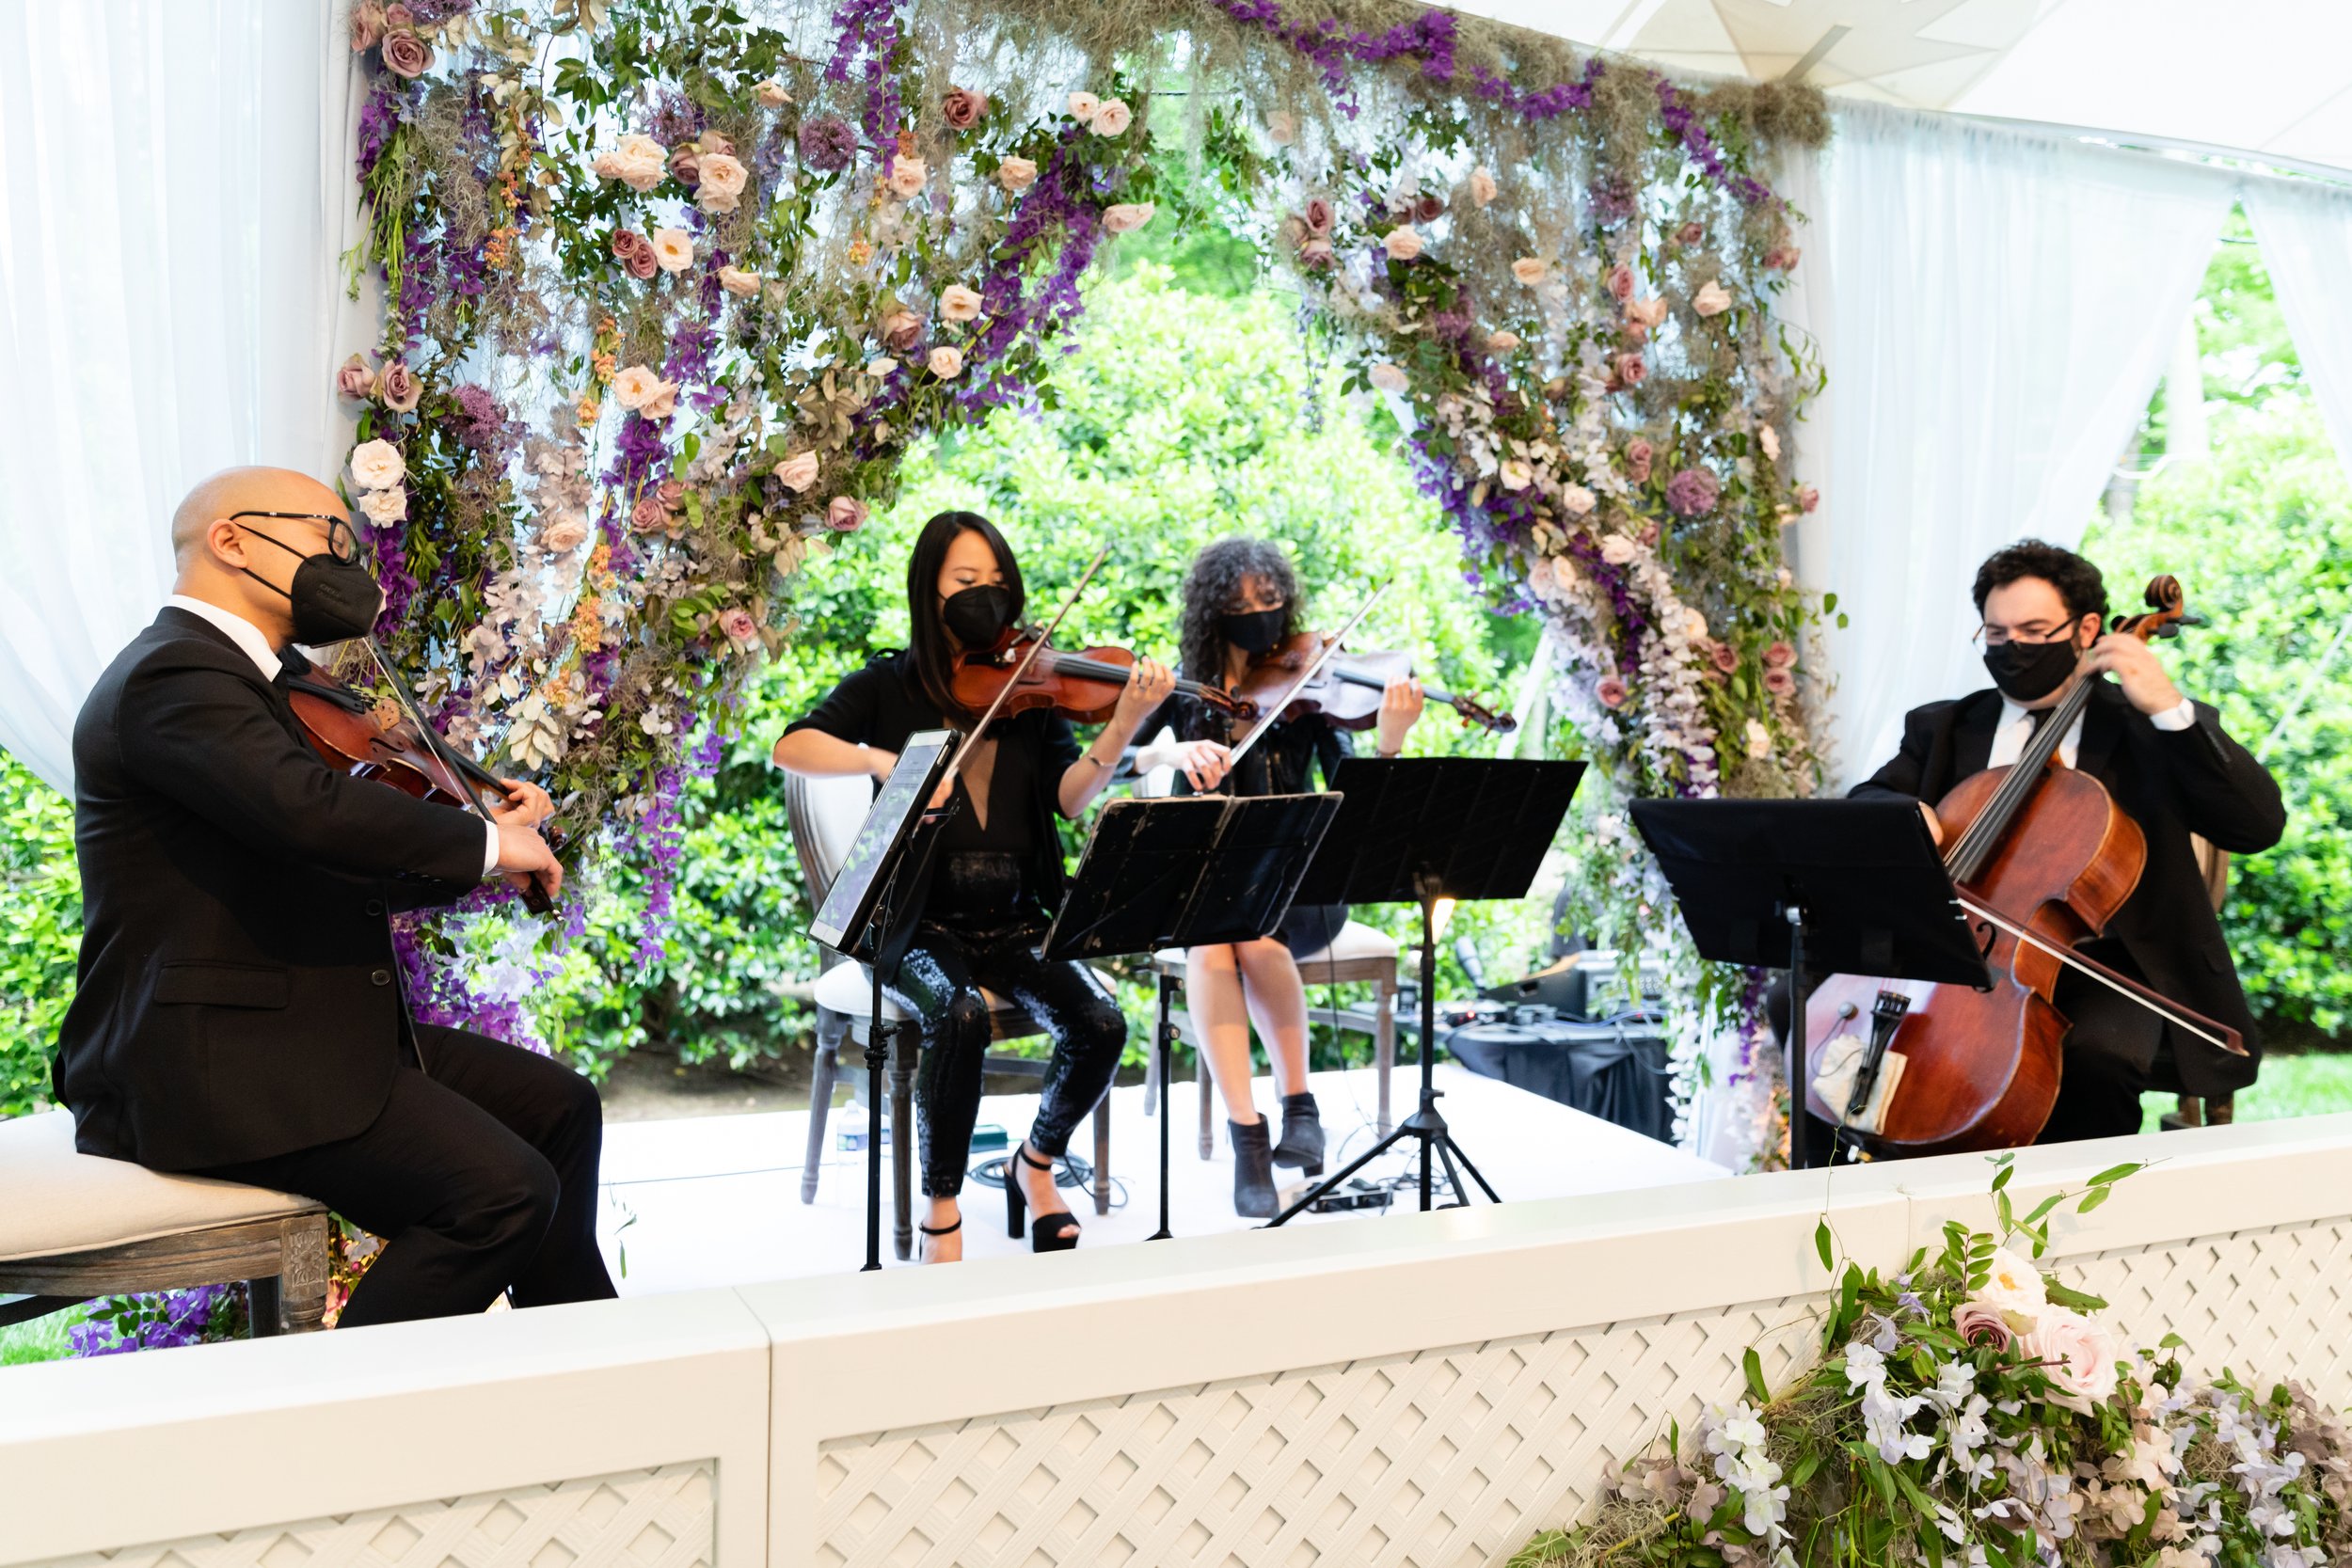 Growing, fresh floral curtain installation with blush garden roses, lavender delphinium, wisteria, globe allium, and vines and greenery for a tented Bridgerton inspired engagement party at a private home in Nashville, TN. Vitamin String Quartet.